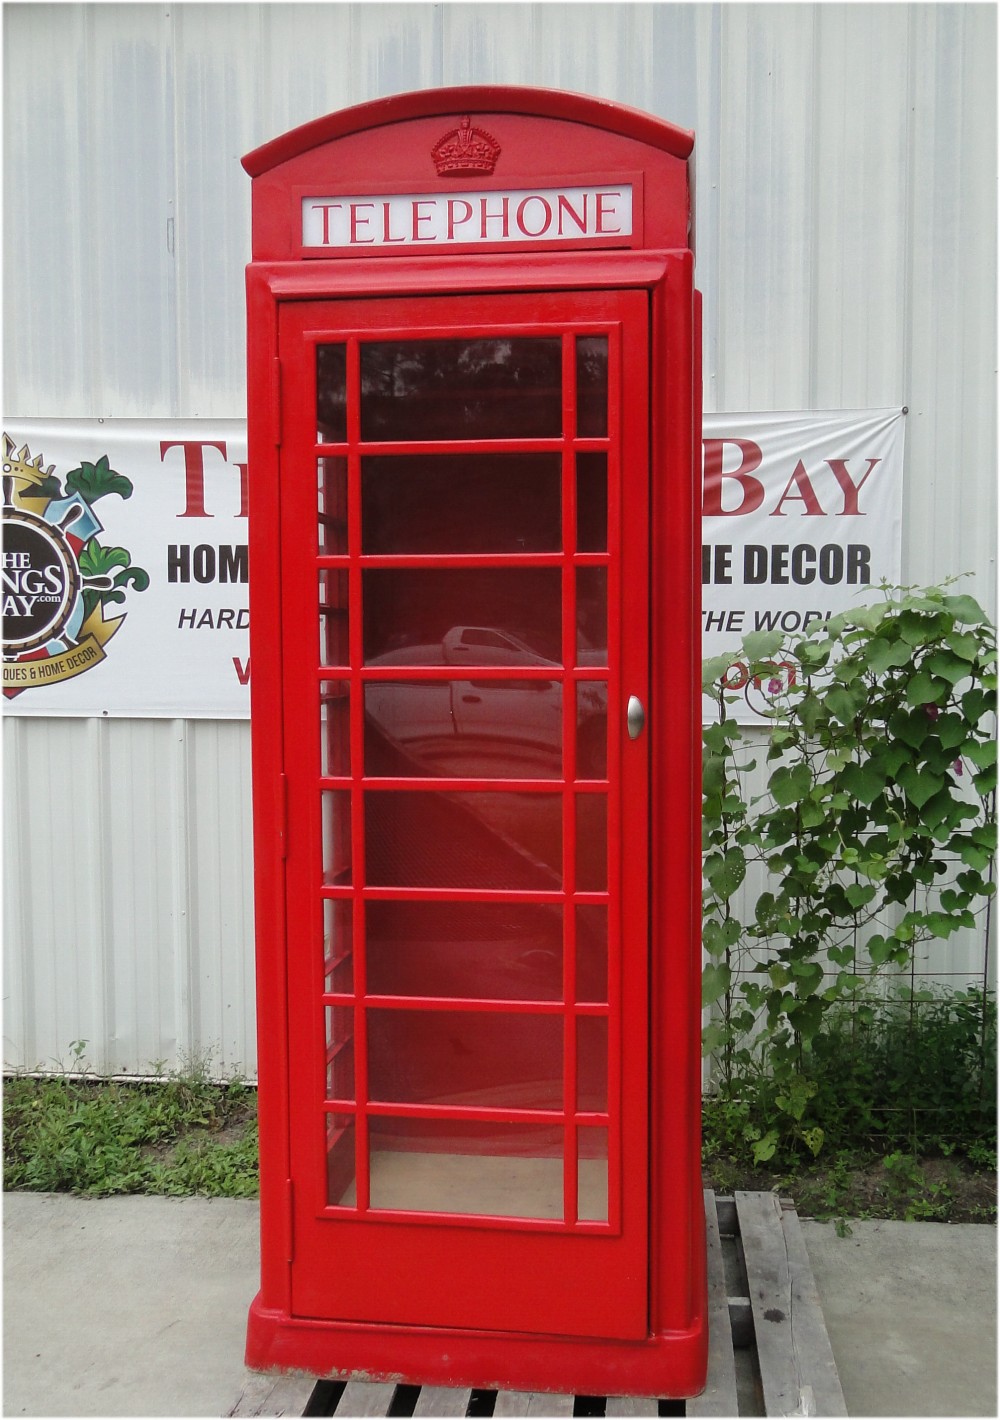 TELEPHONE 6x18 Metal Sign RED for British Phone Booth Room 